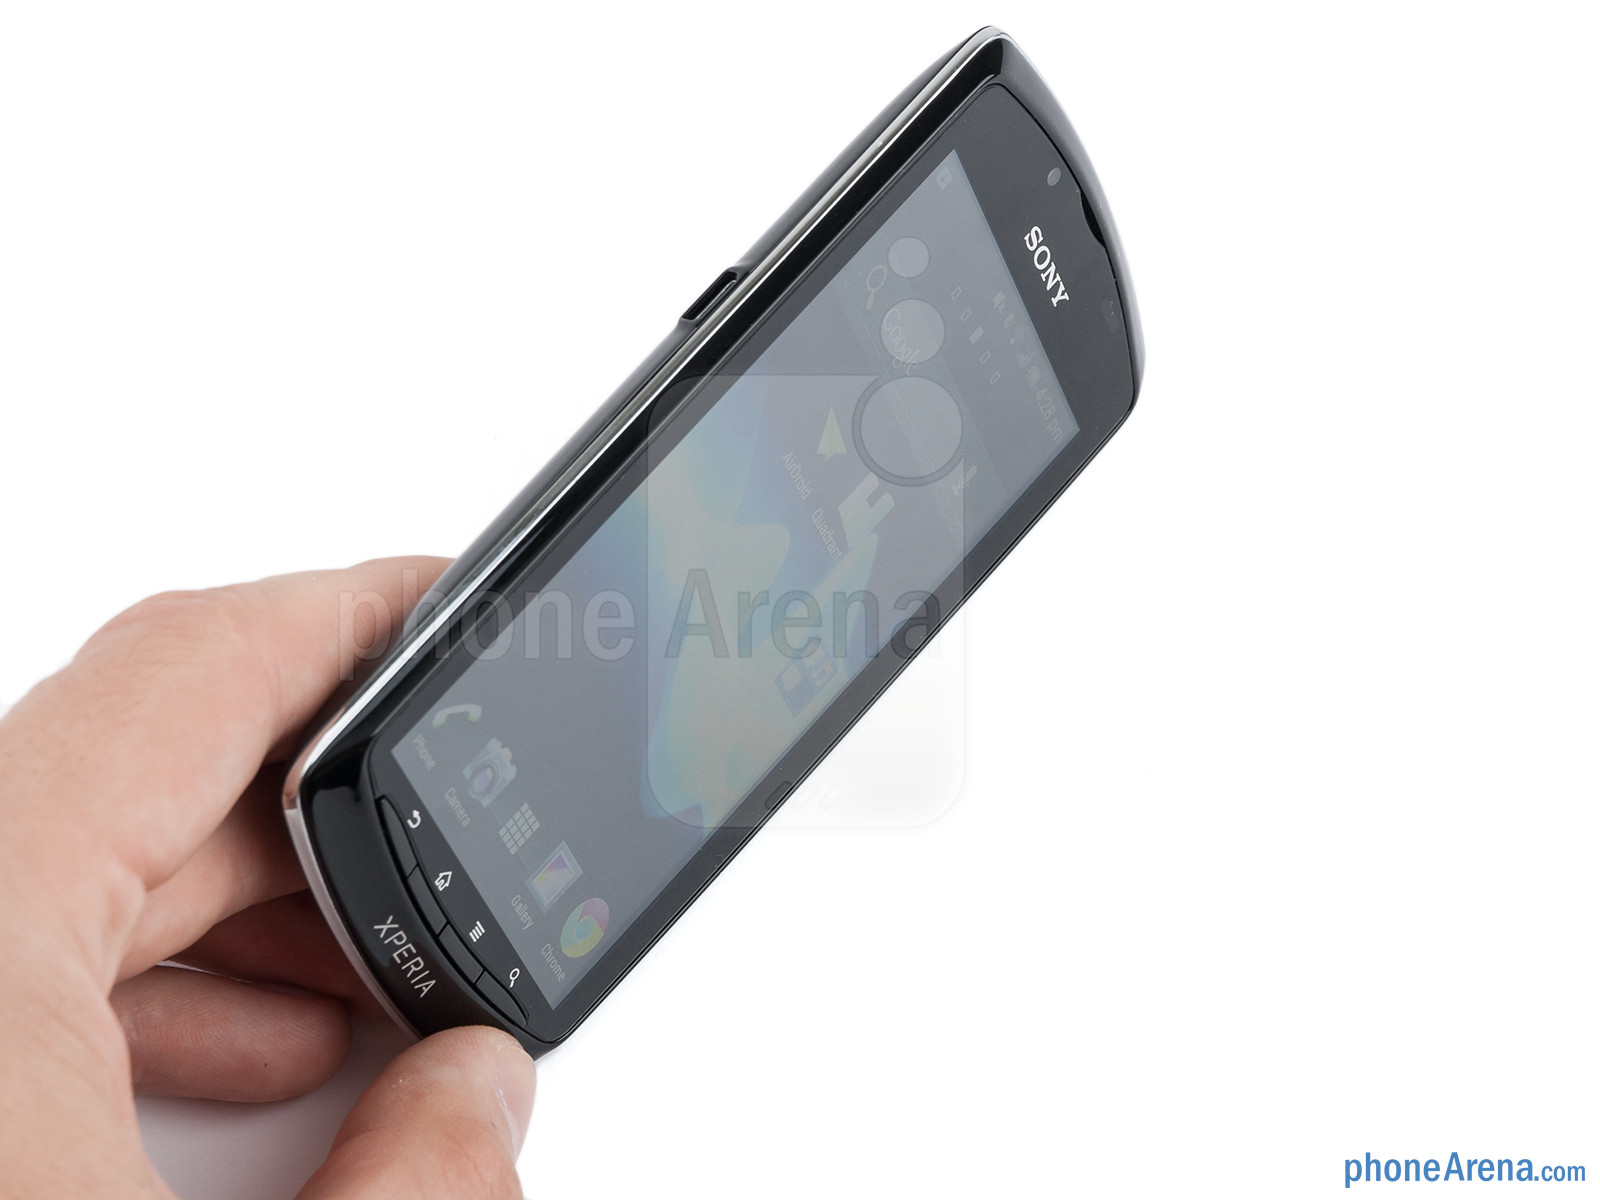 Sony Xperia neo L Review